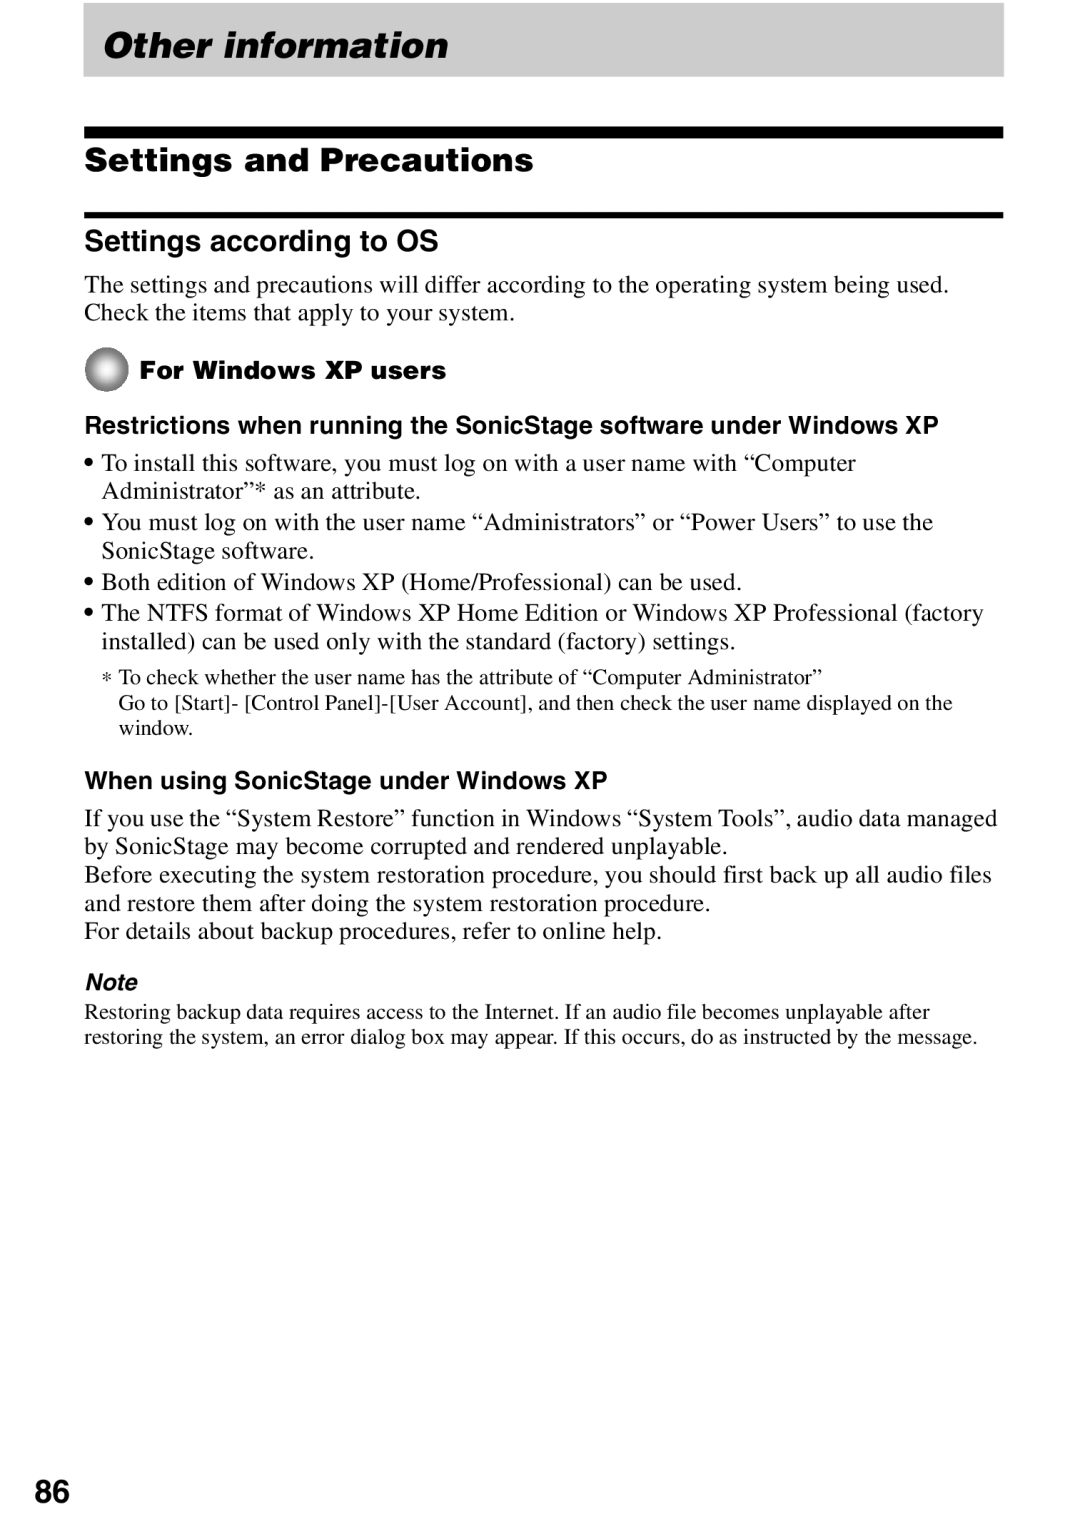 Sony MZ-N510 Other information, Settings and Precautions, For Windows XP users, When using SonicStage under Windows XP 